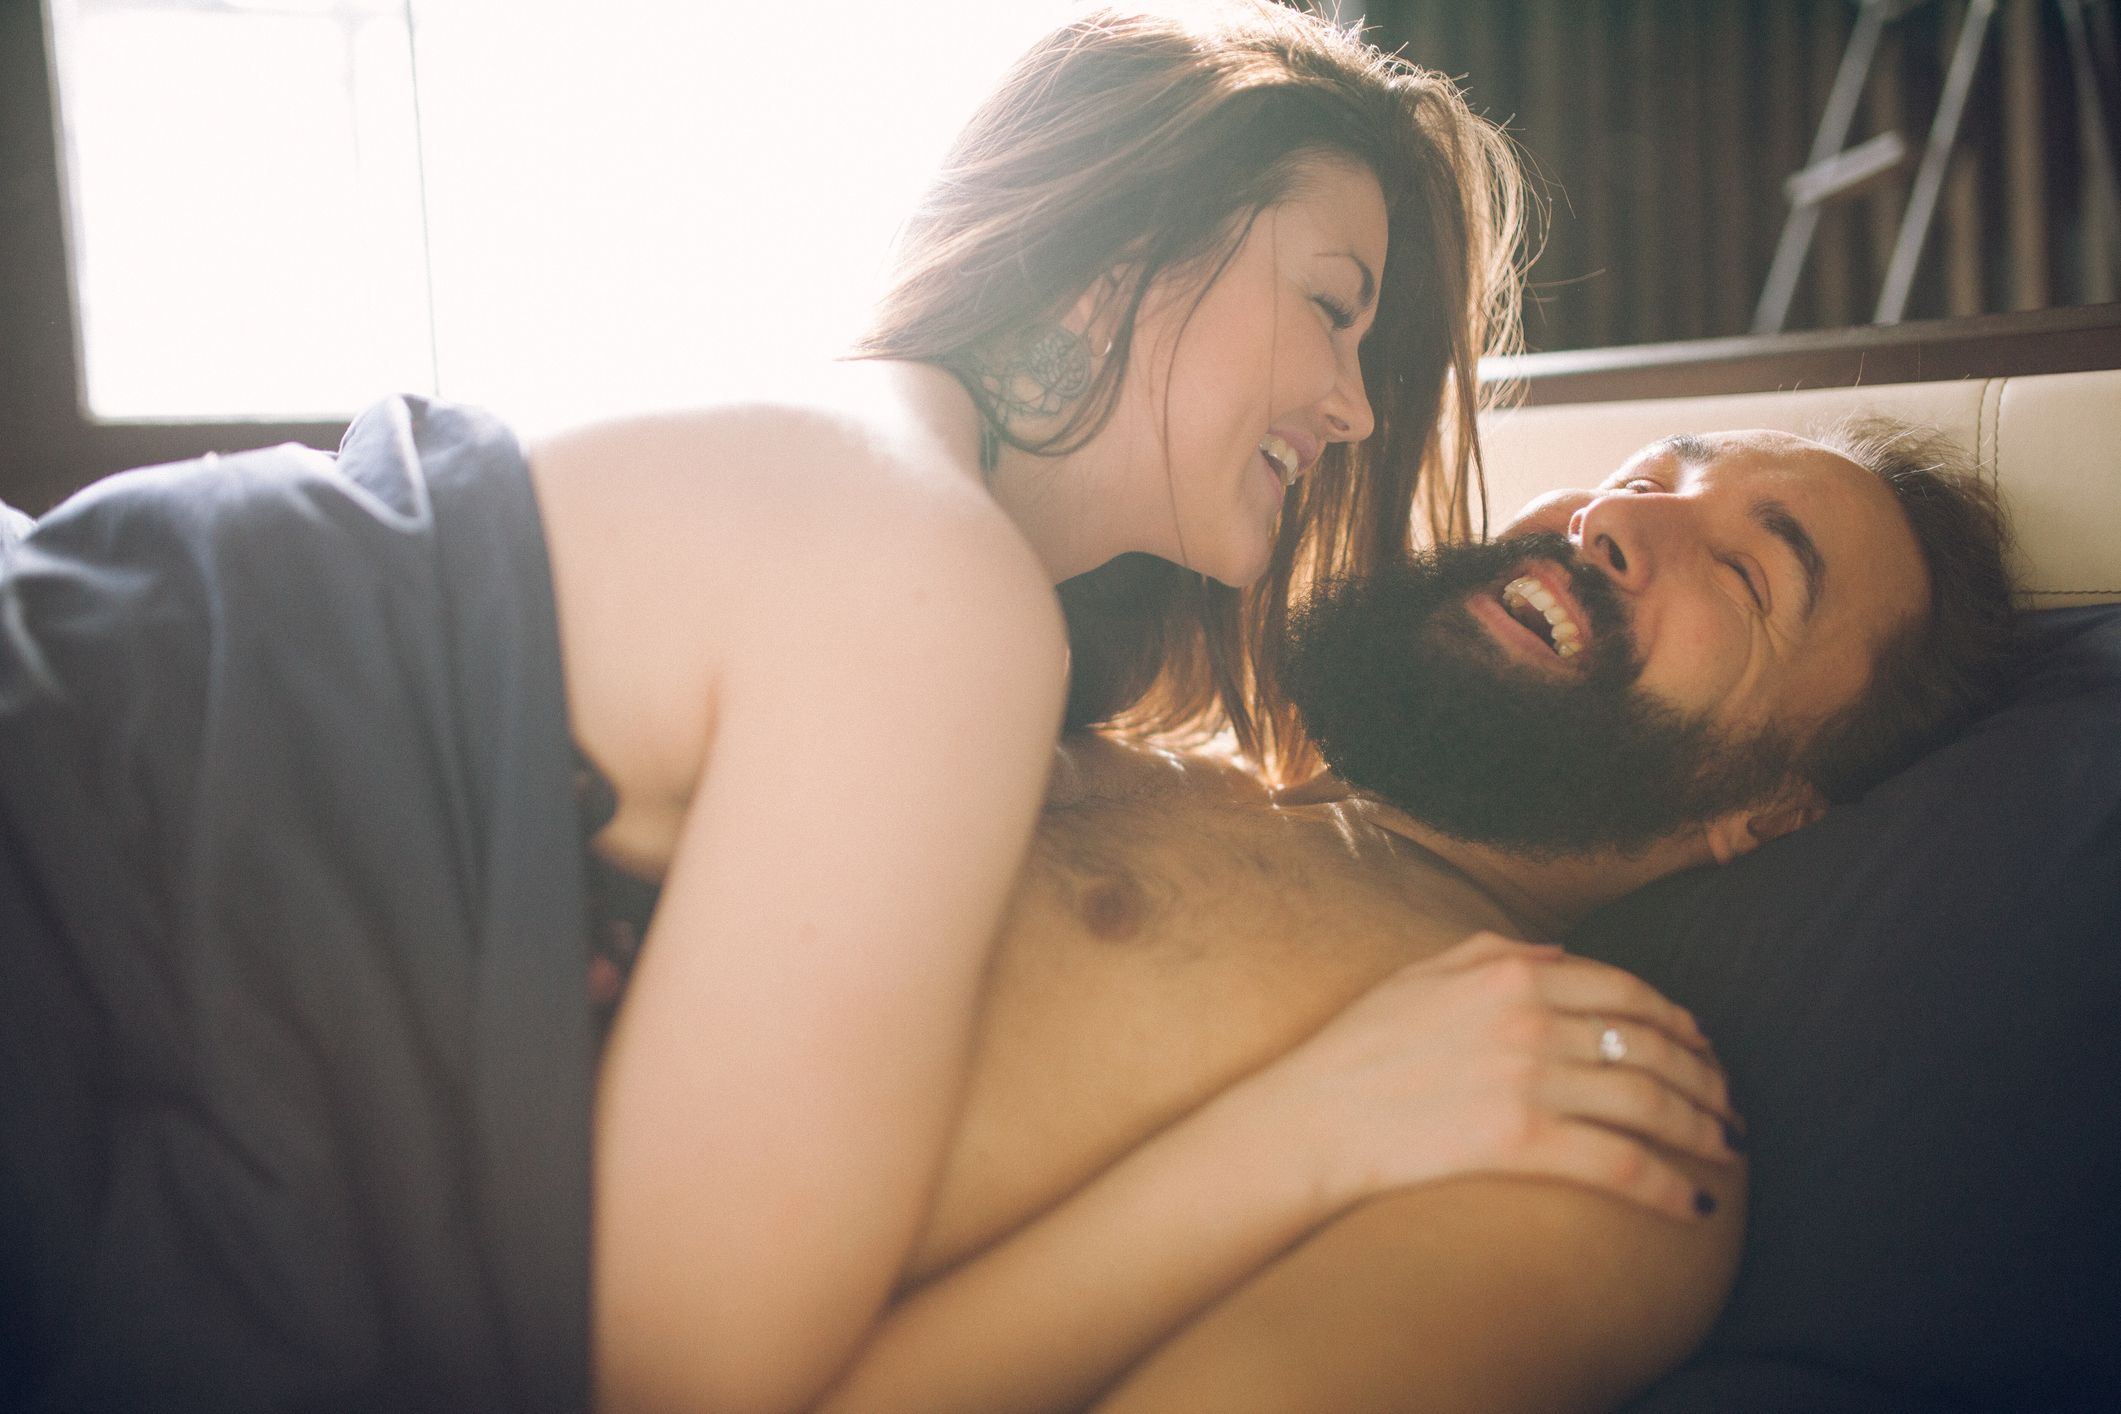 Fat White People Having Sex - 54 Fun New Sex Positions for Adventurous Couples